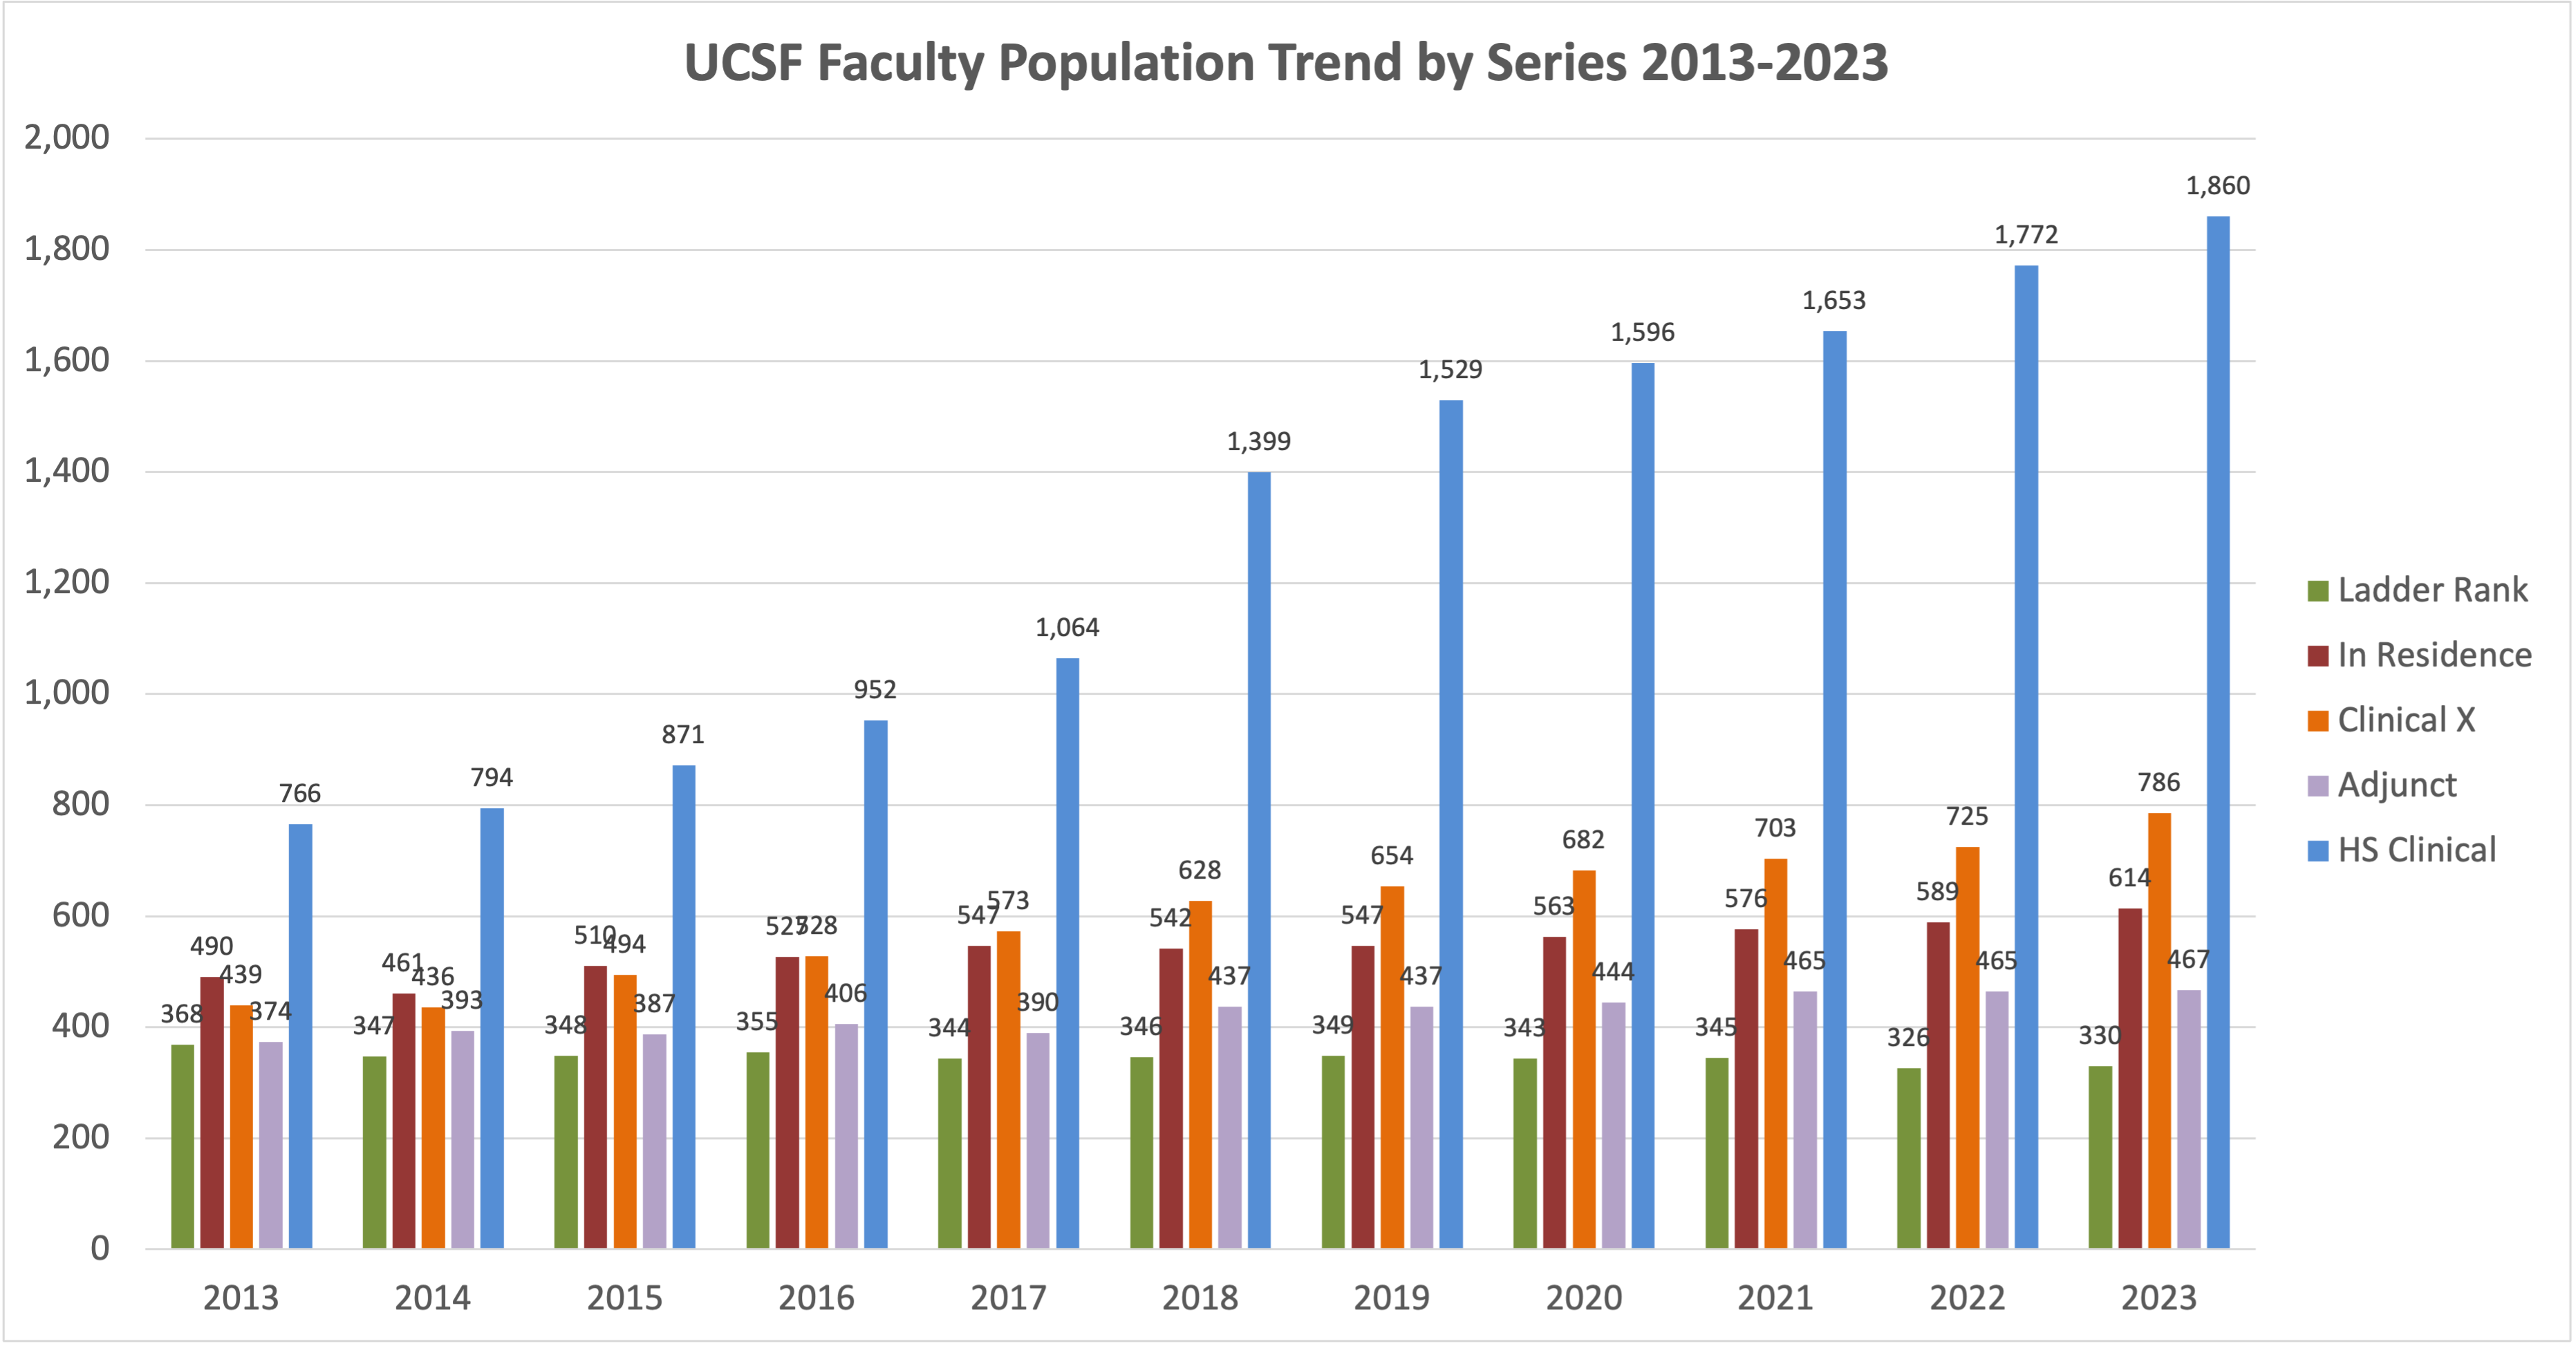 UCSF Facuty Population Trend by Series Bar 2013-2023